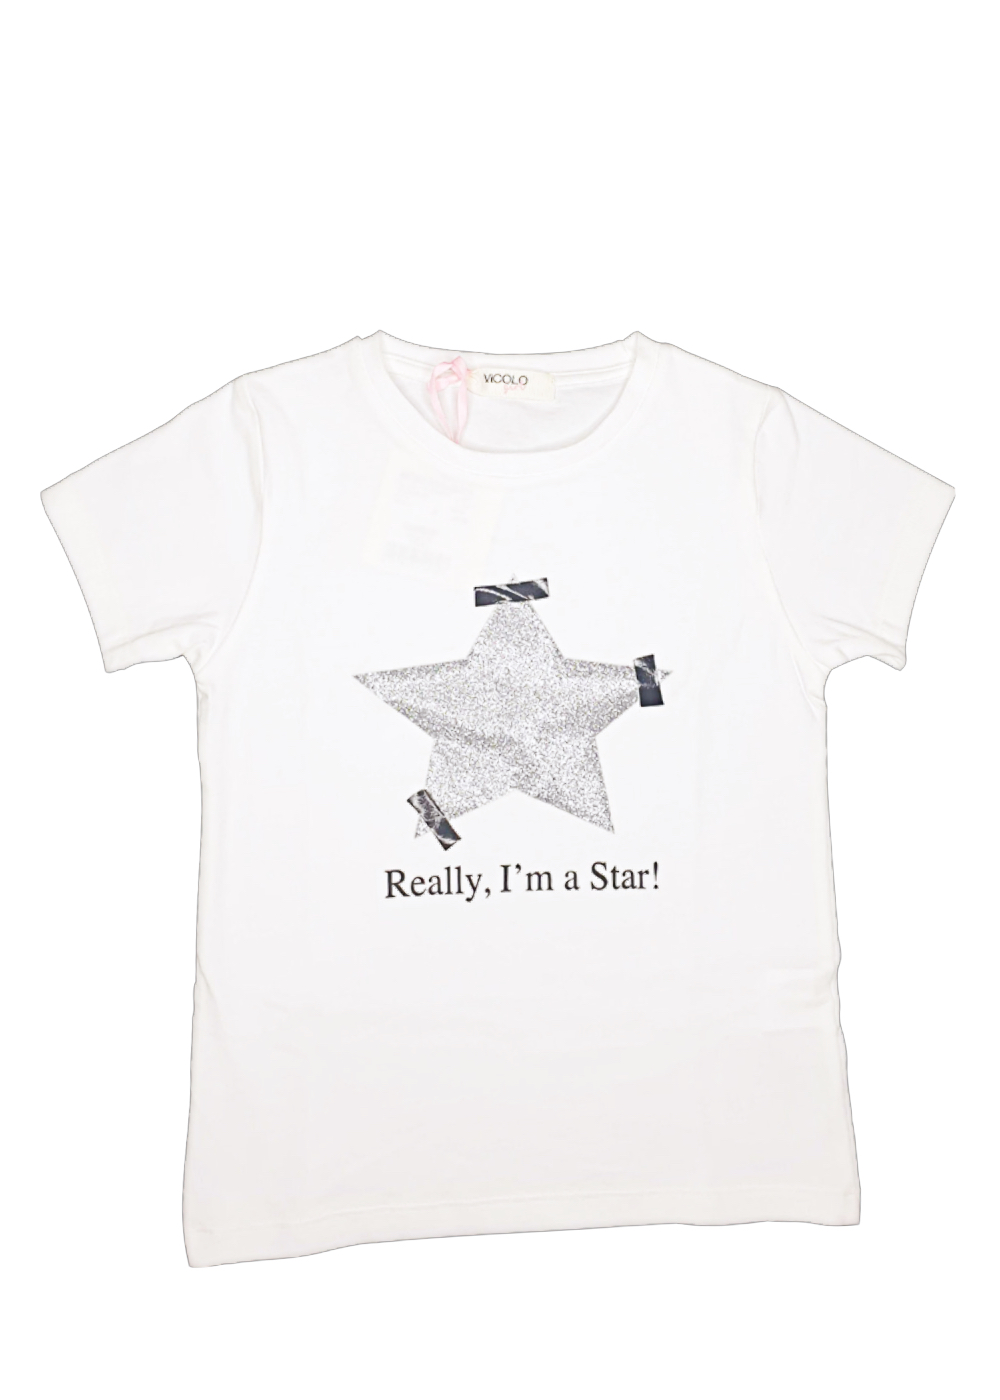 Featured image for “VICOLO T-SHIRT STAR”